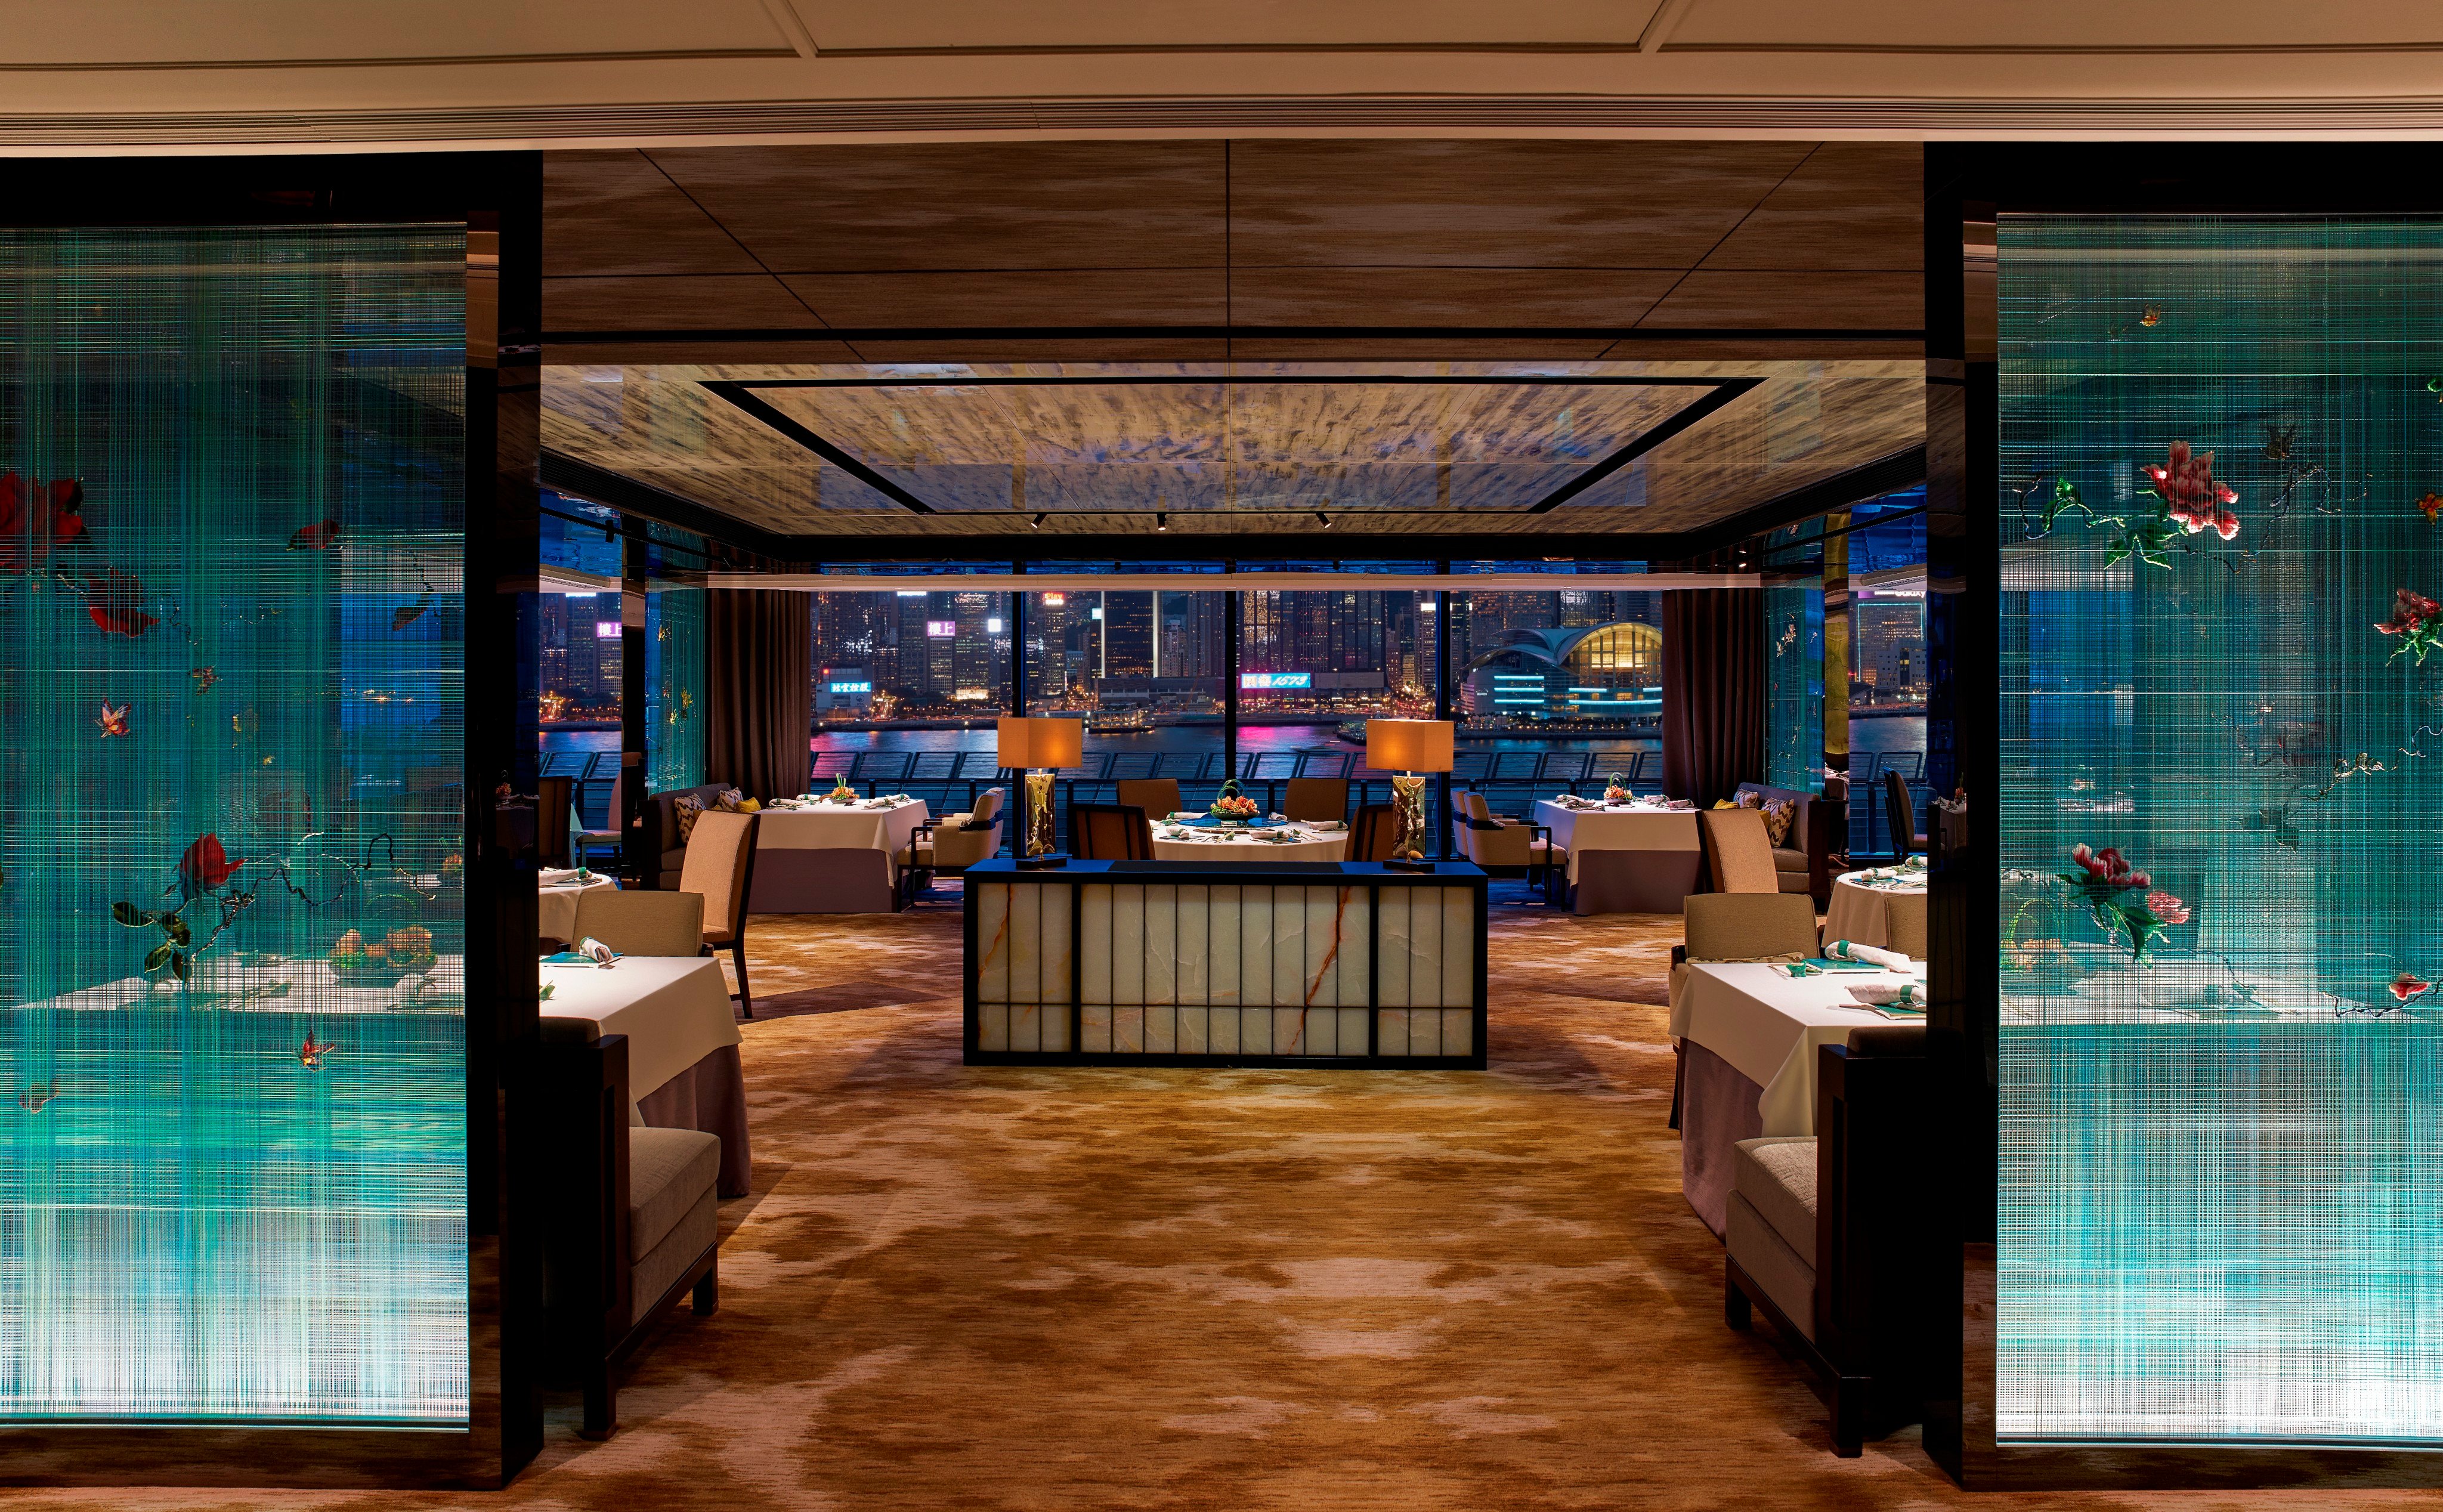 The main dining area at Lai Ching Heen, in The Regent hotel, Hong Kong, overlooks Victoria Harbour. Photo: Lai Ching Heen